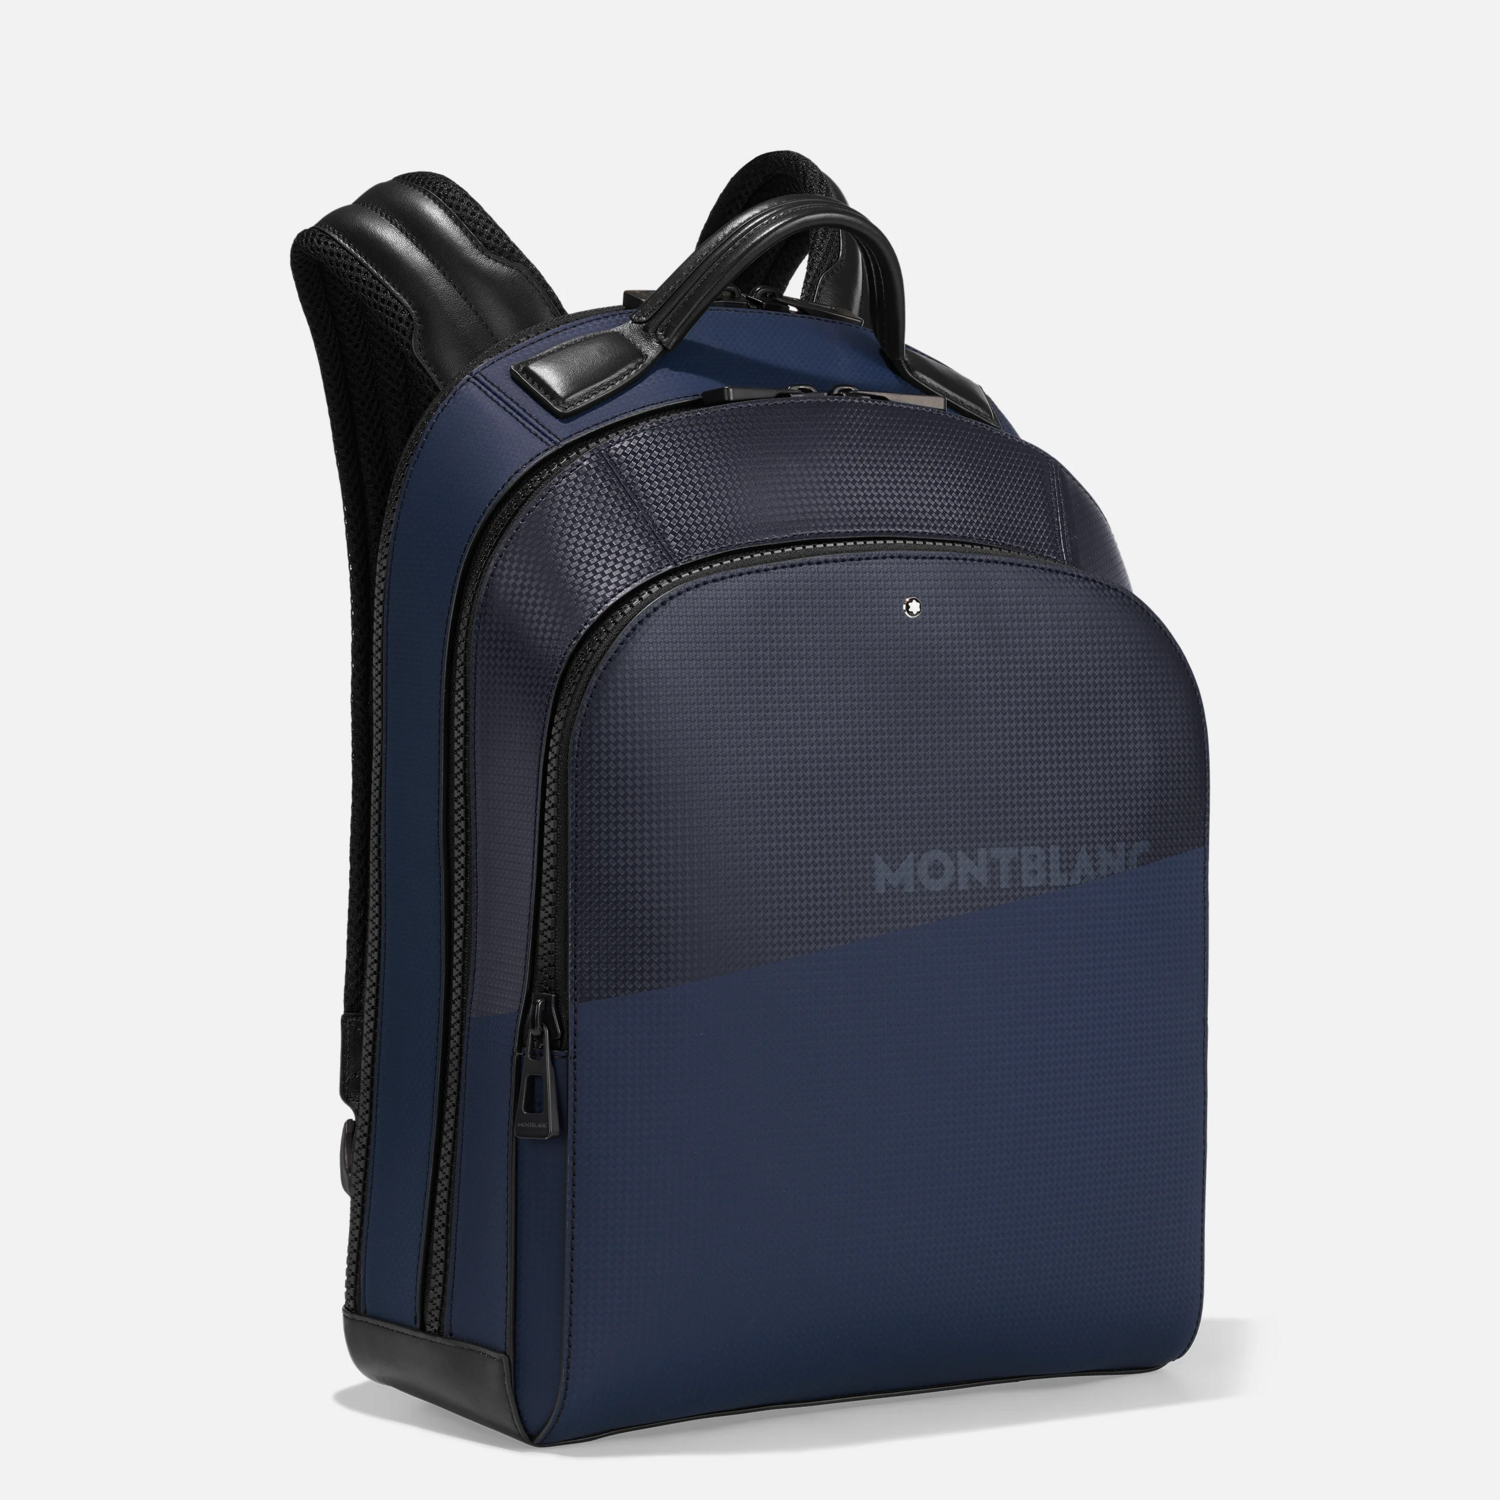 Montblanc Extreme 2.0 Small Backpack